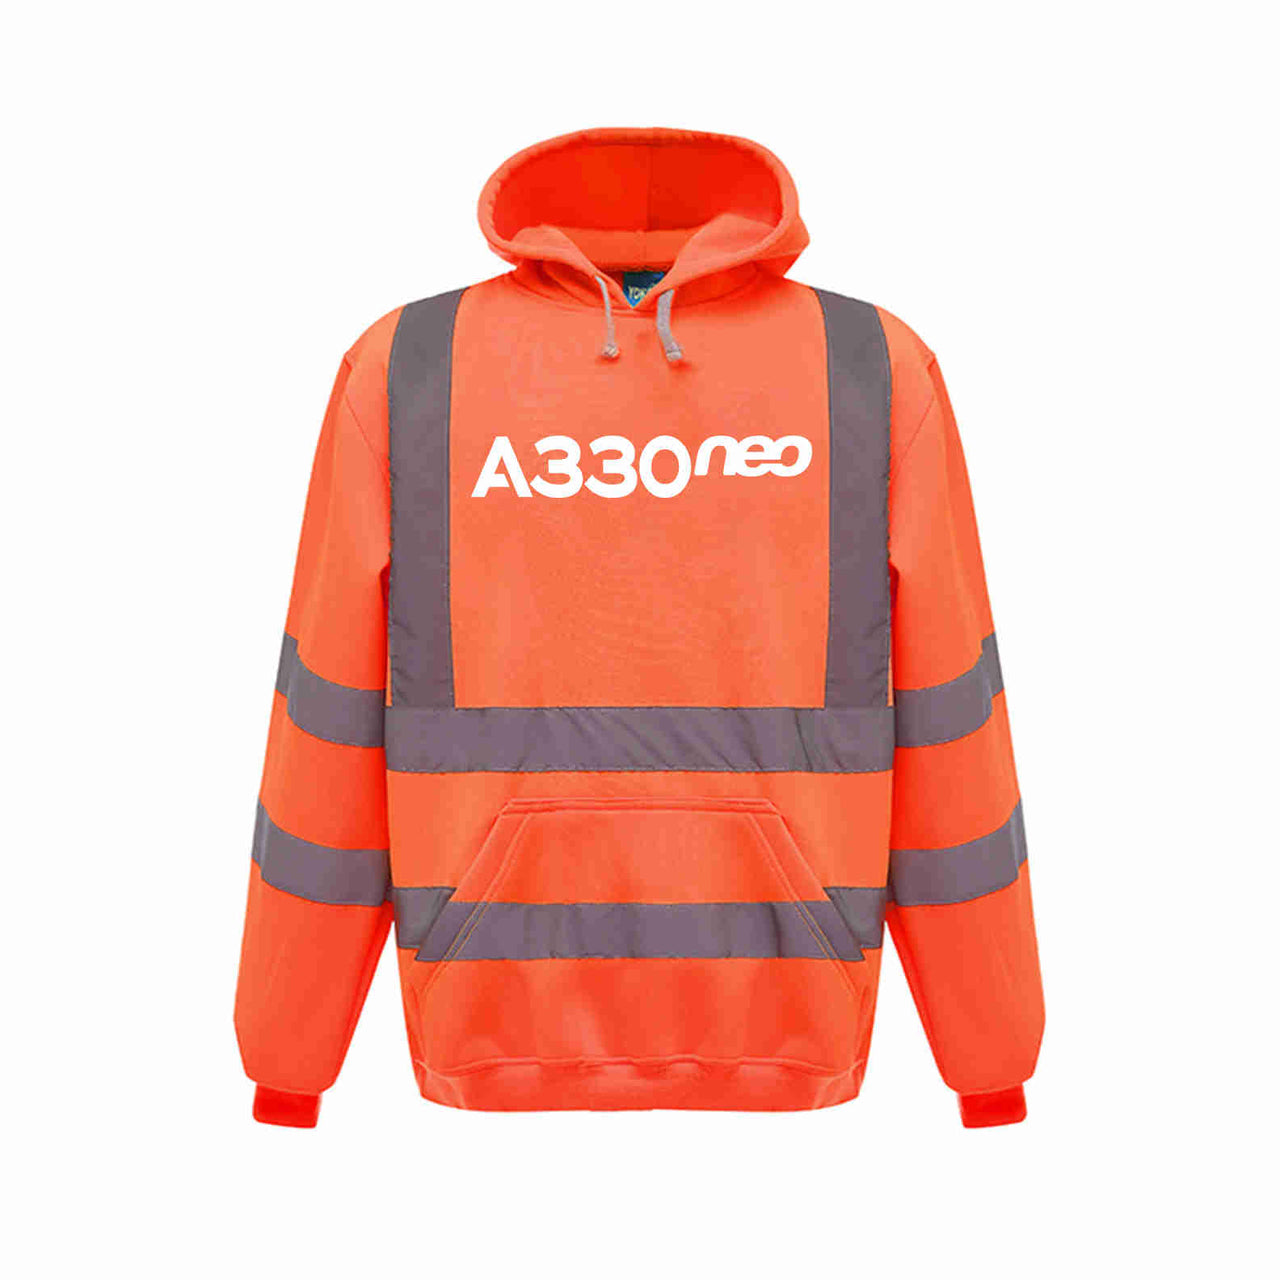 A330neo & Text Designed Reflective Hoodies